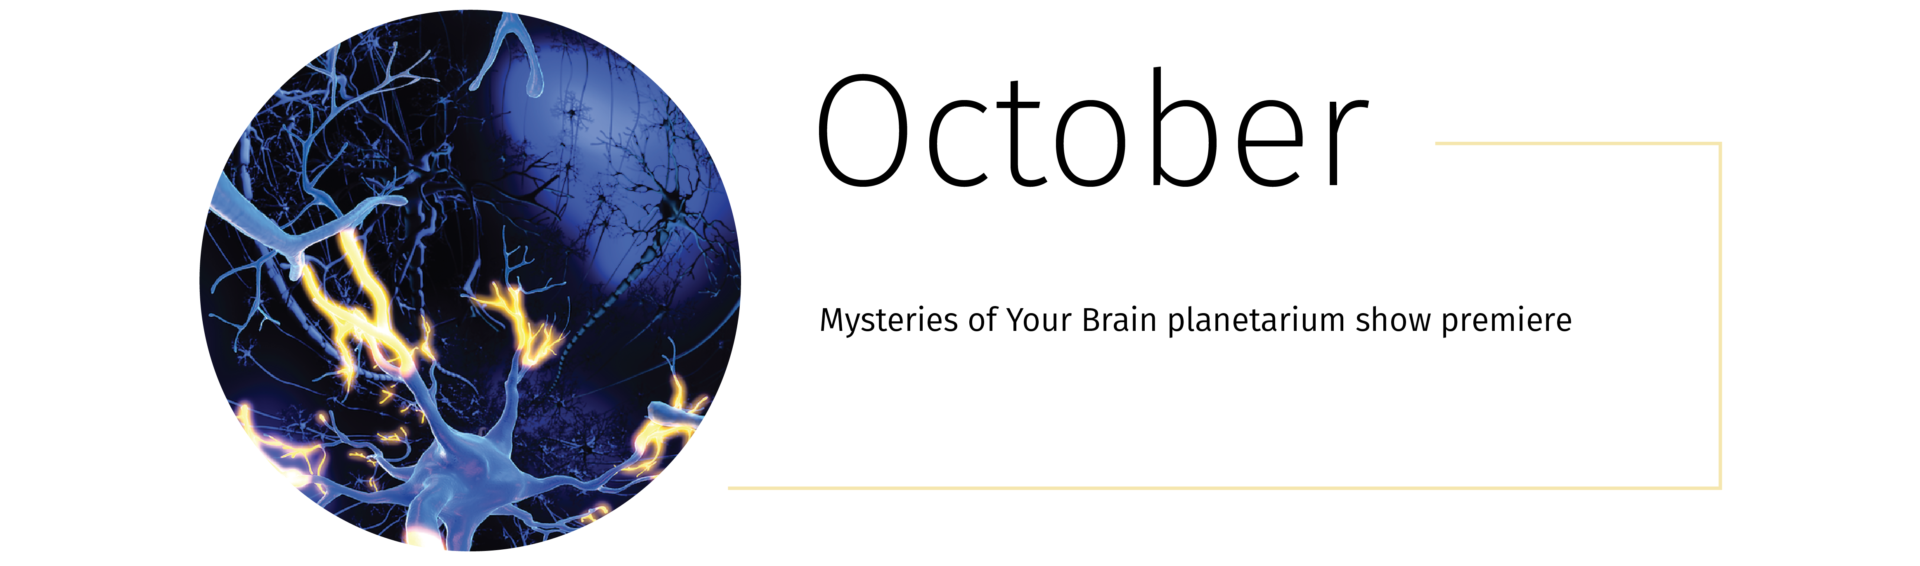 An animation of neurons with the text, "Mysteries of Your Brain planetarium show premiere"